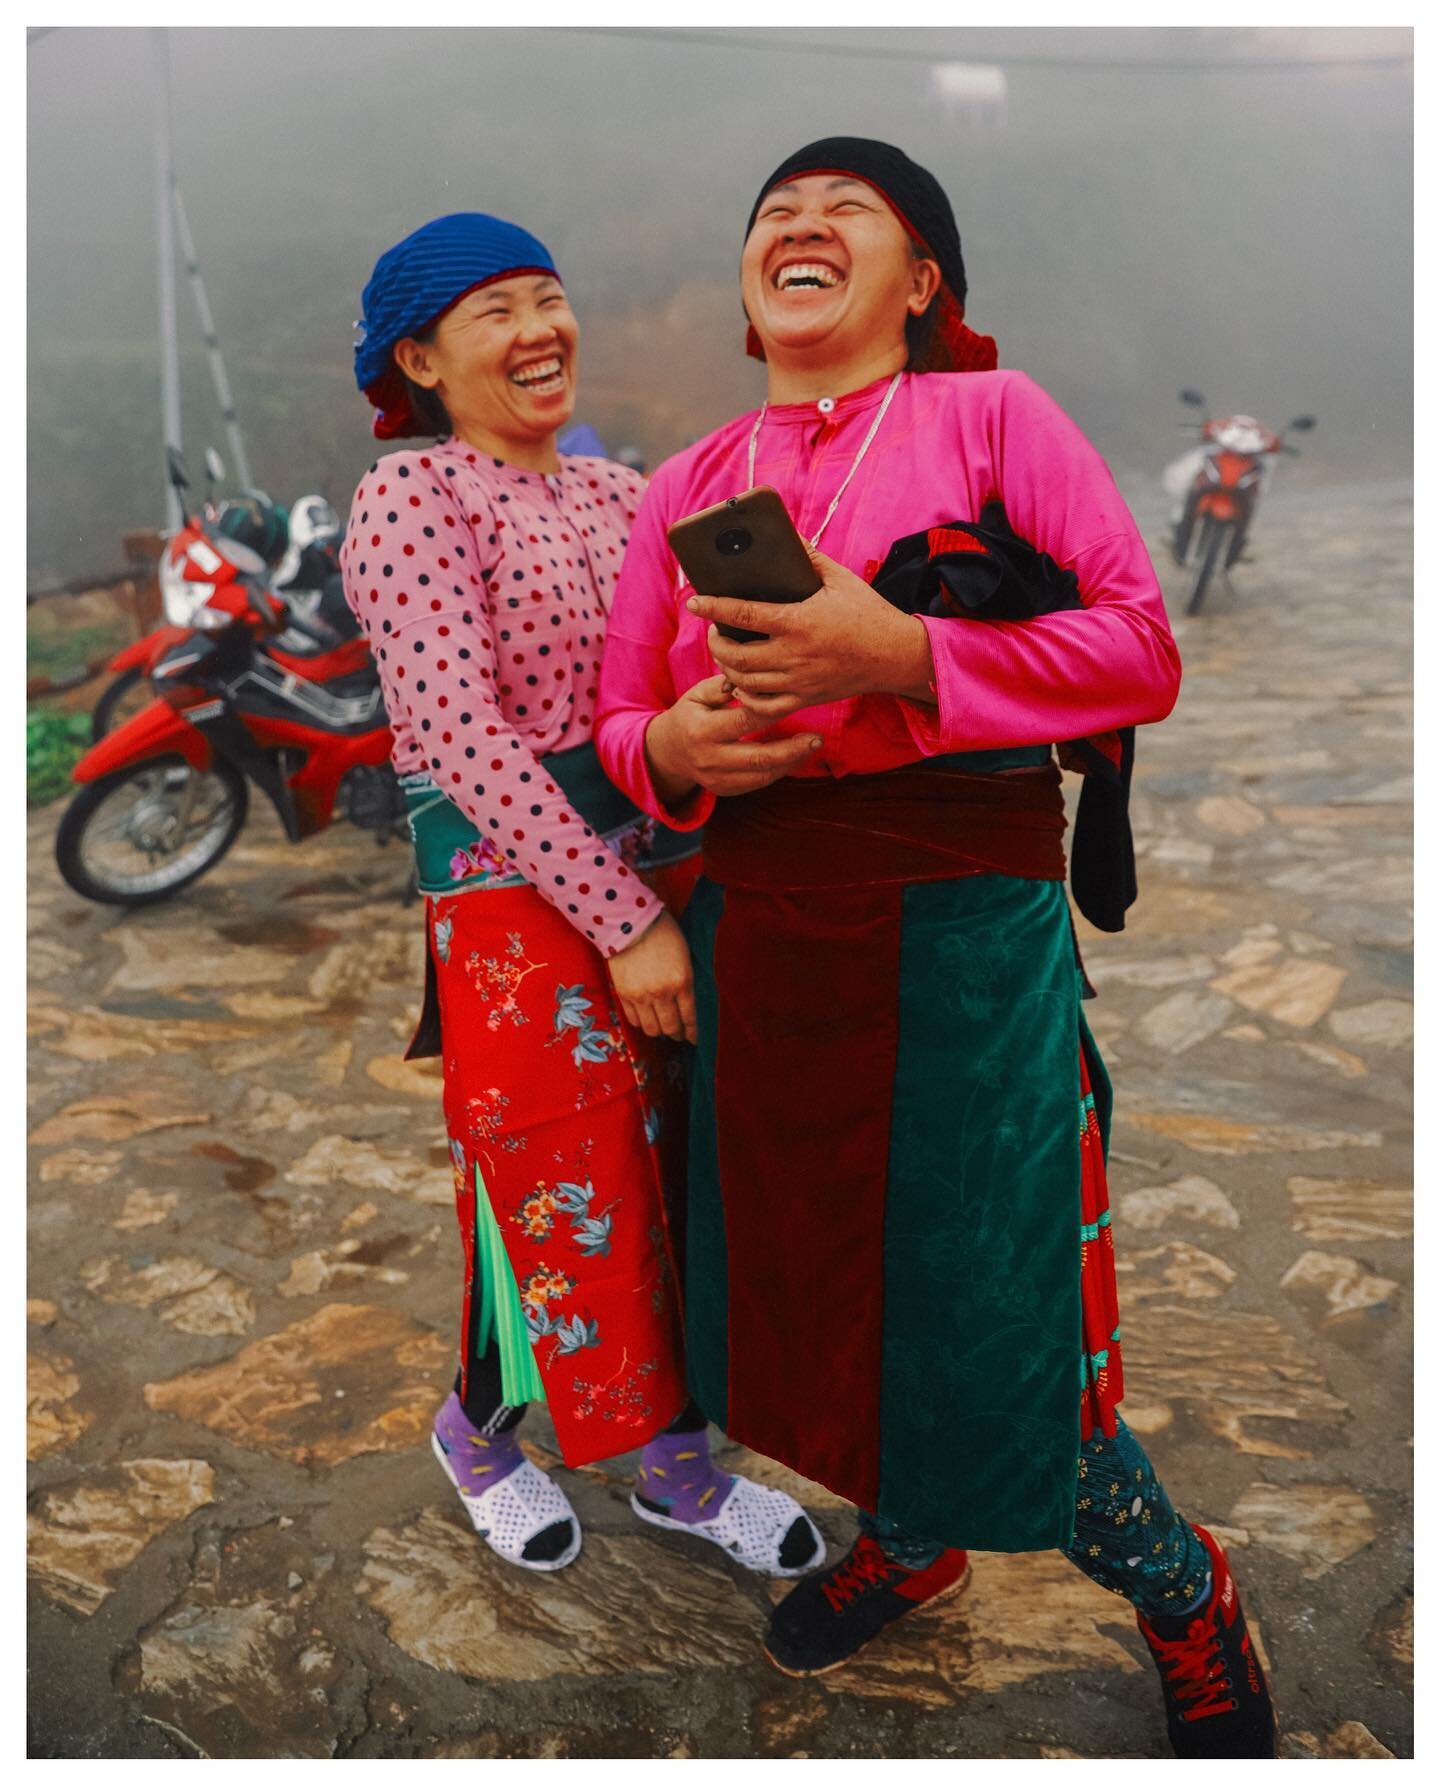 Two local women crack up while making a Tik Tok, early morning on a mountaintop near the Chinese border